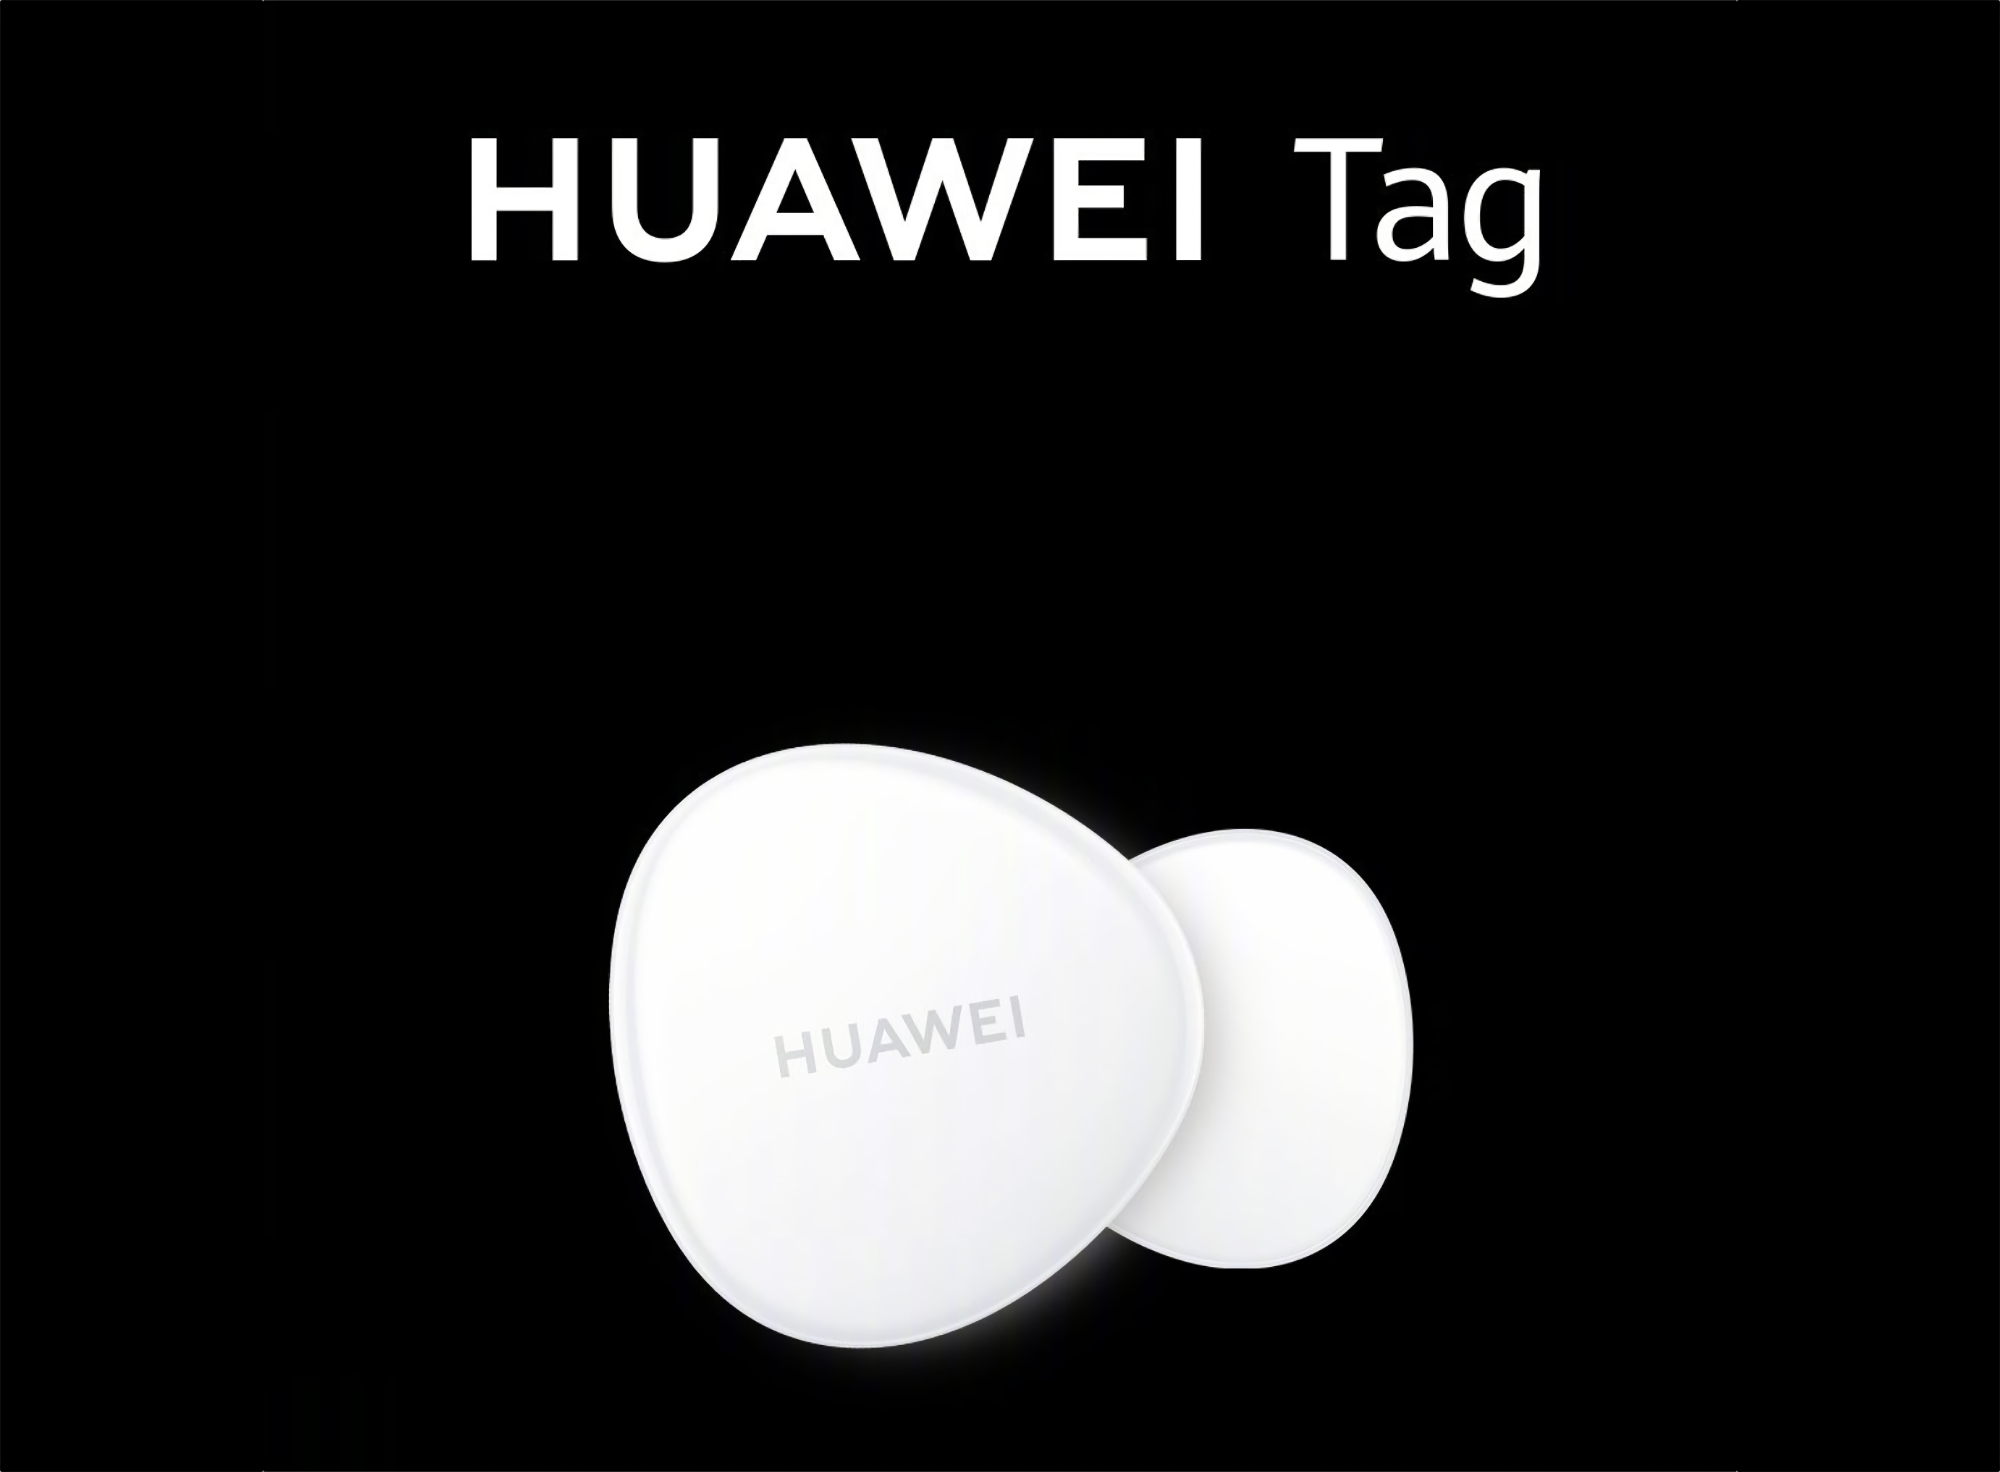 Analogous to Apple AirTag and Samsung Galaxy Smart Tag: Huawei